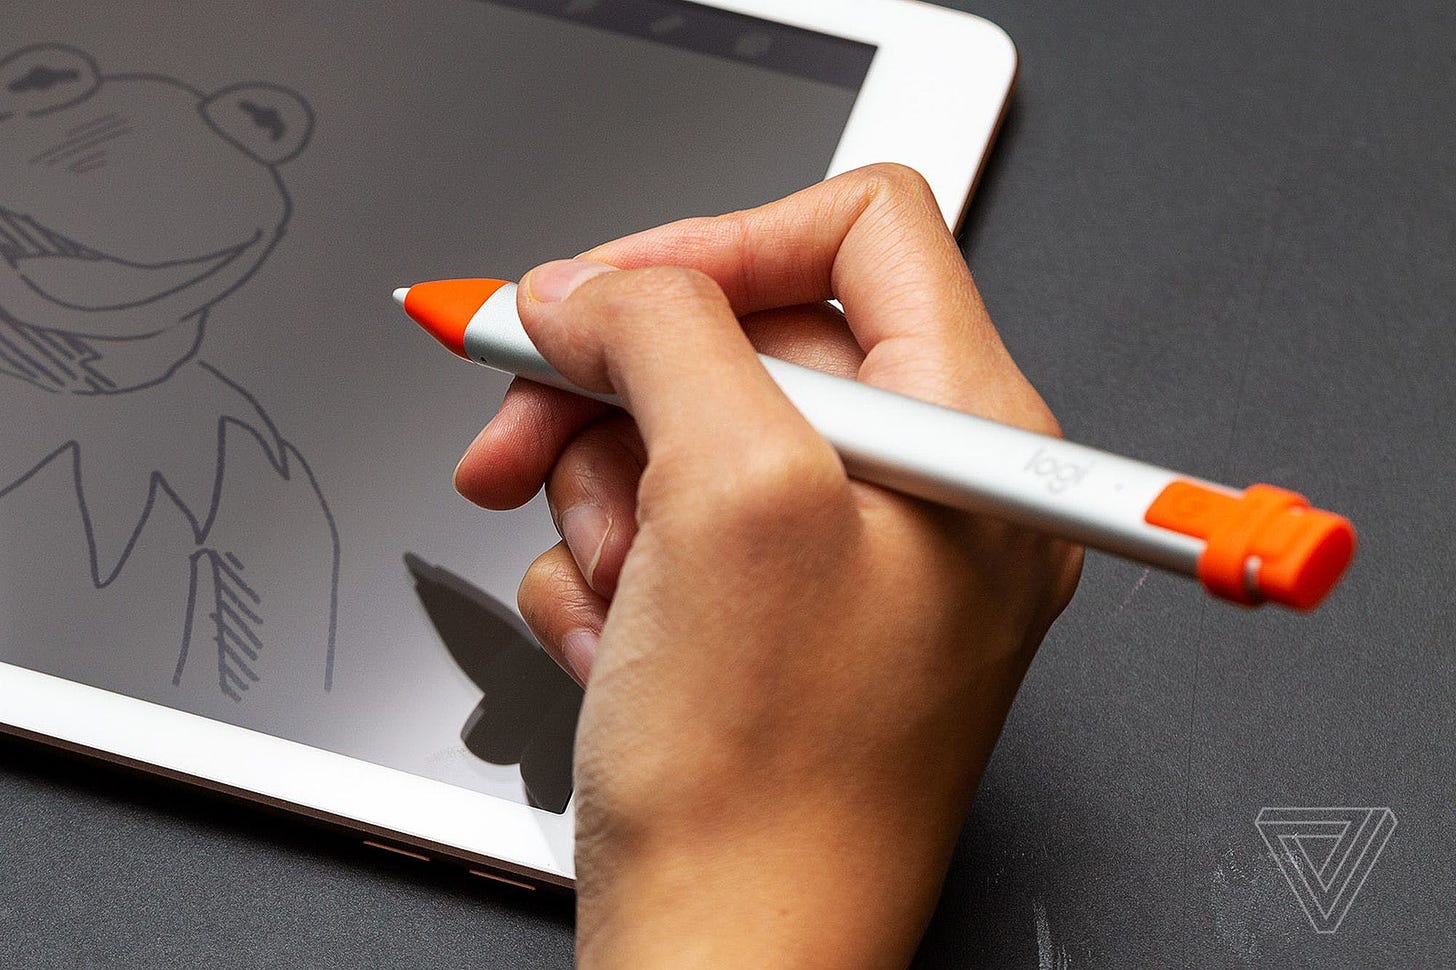 A photo of a hand holding a digital stylus over an iPad showing an illustration of Kermit the Frog.